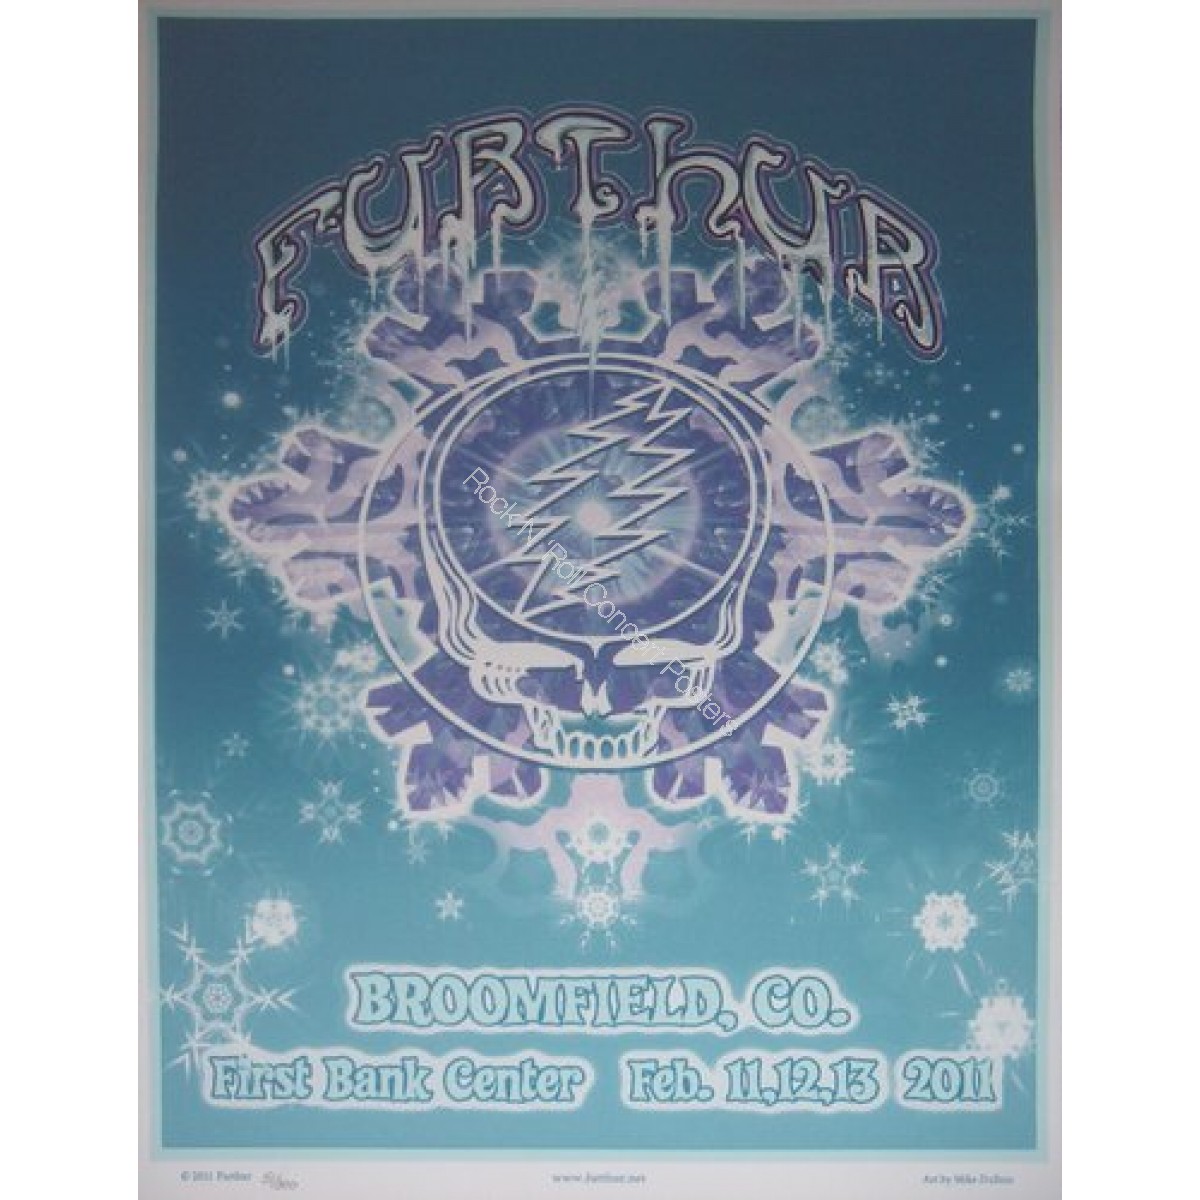 Furthur @ The 1st Bank Center Broomfield Colorado 2/11-13/11 Variant Poster sold only the 2nd & 3rd night Rare! 